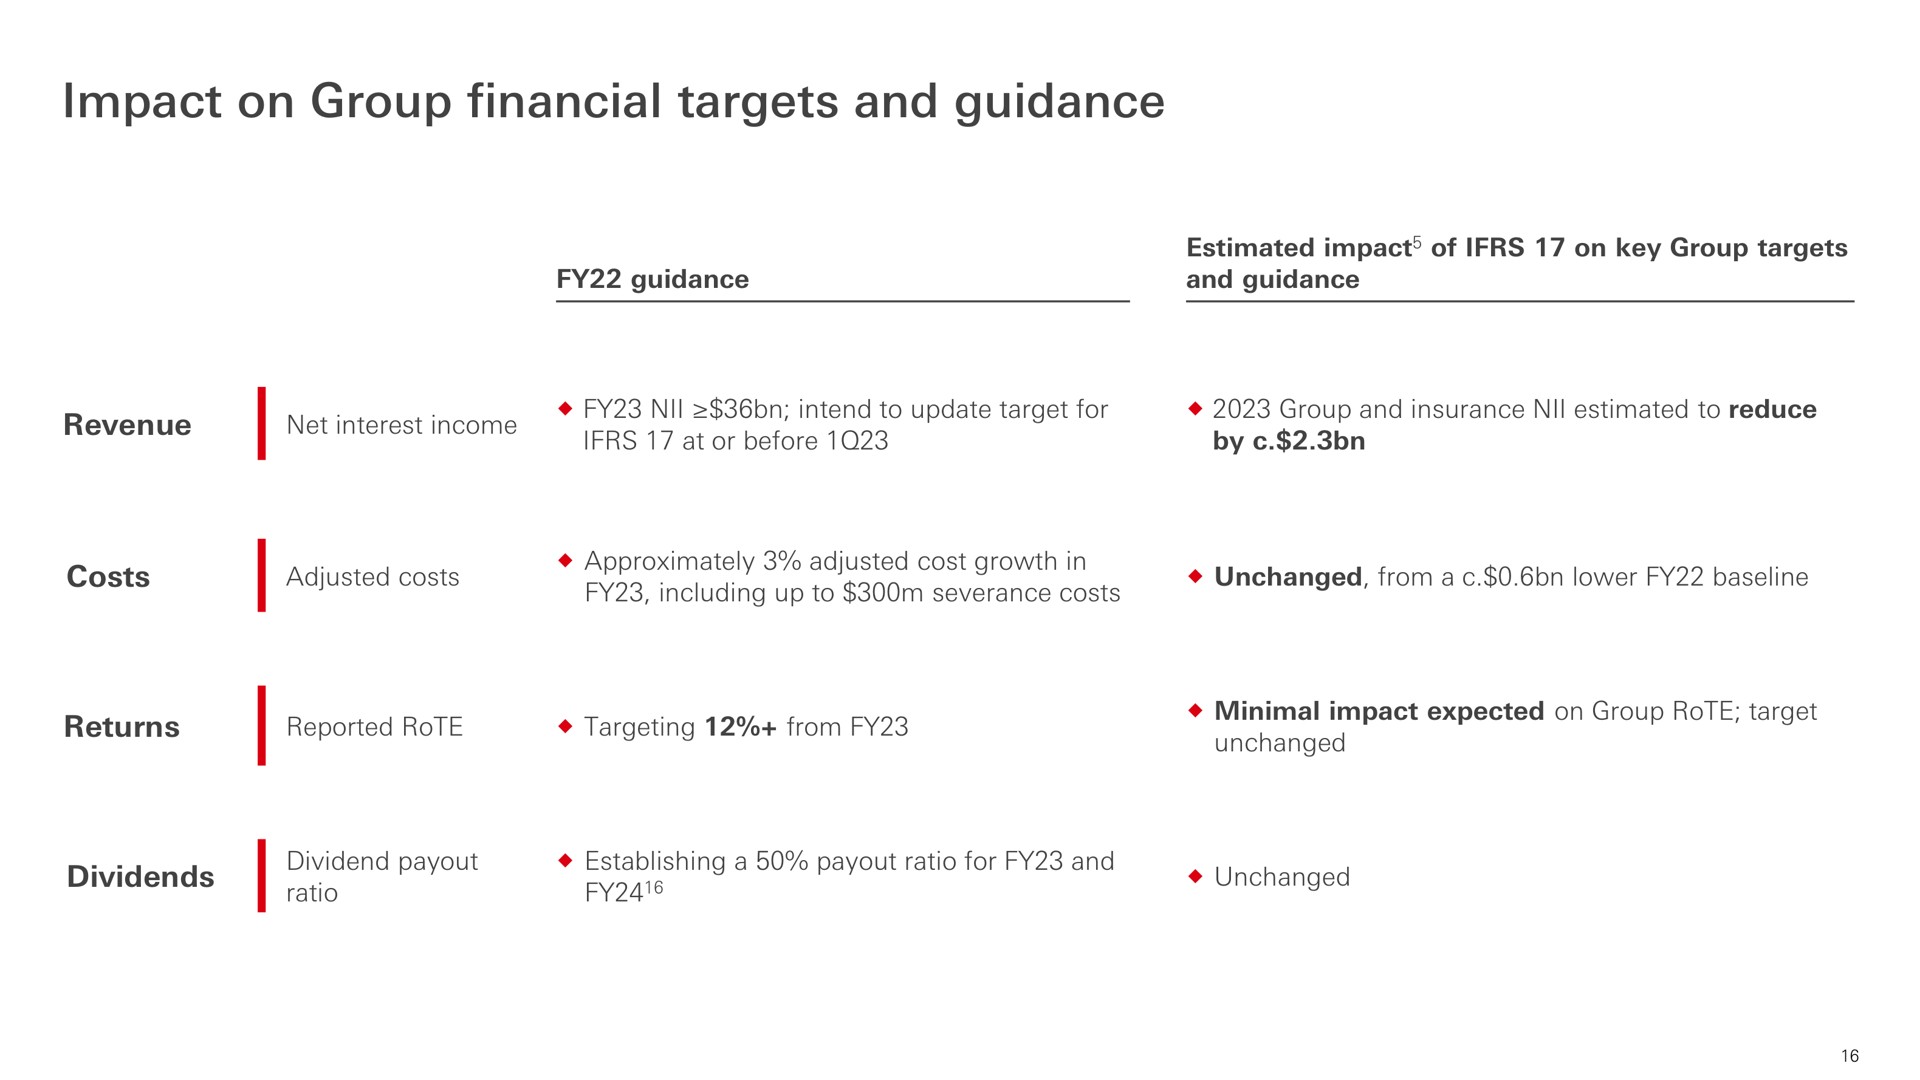 impact on group financial targets and guidance returns reported rote targeting from expected rote target | HSBC